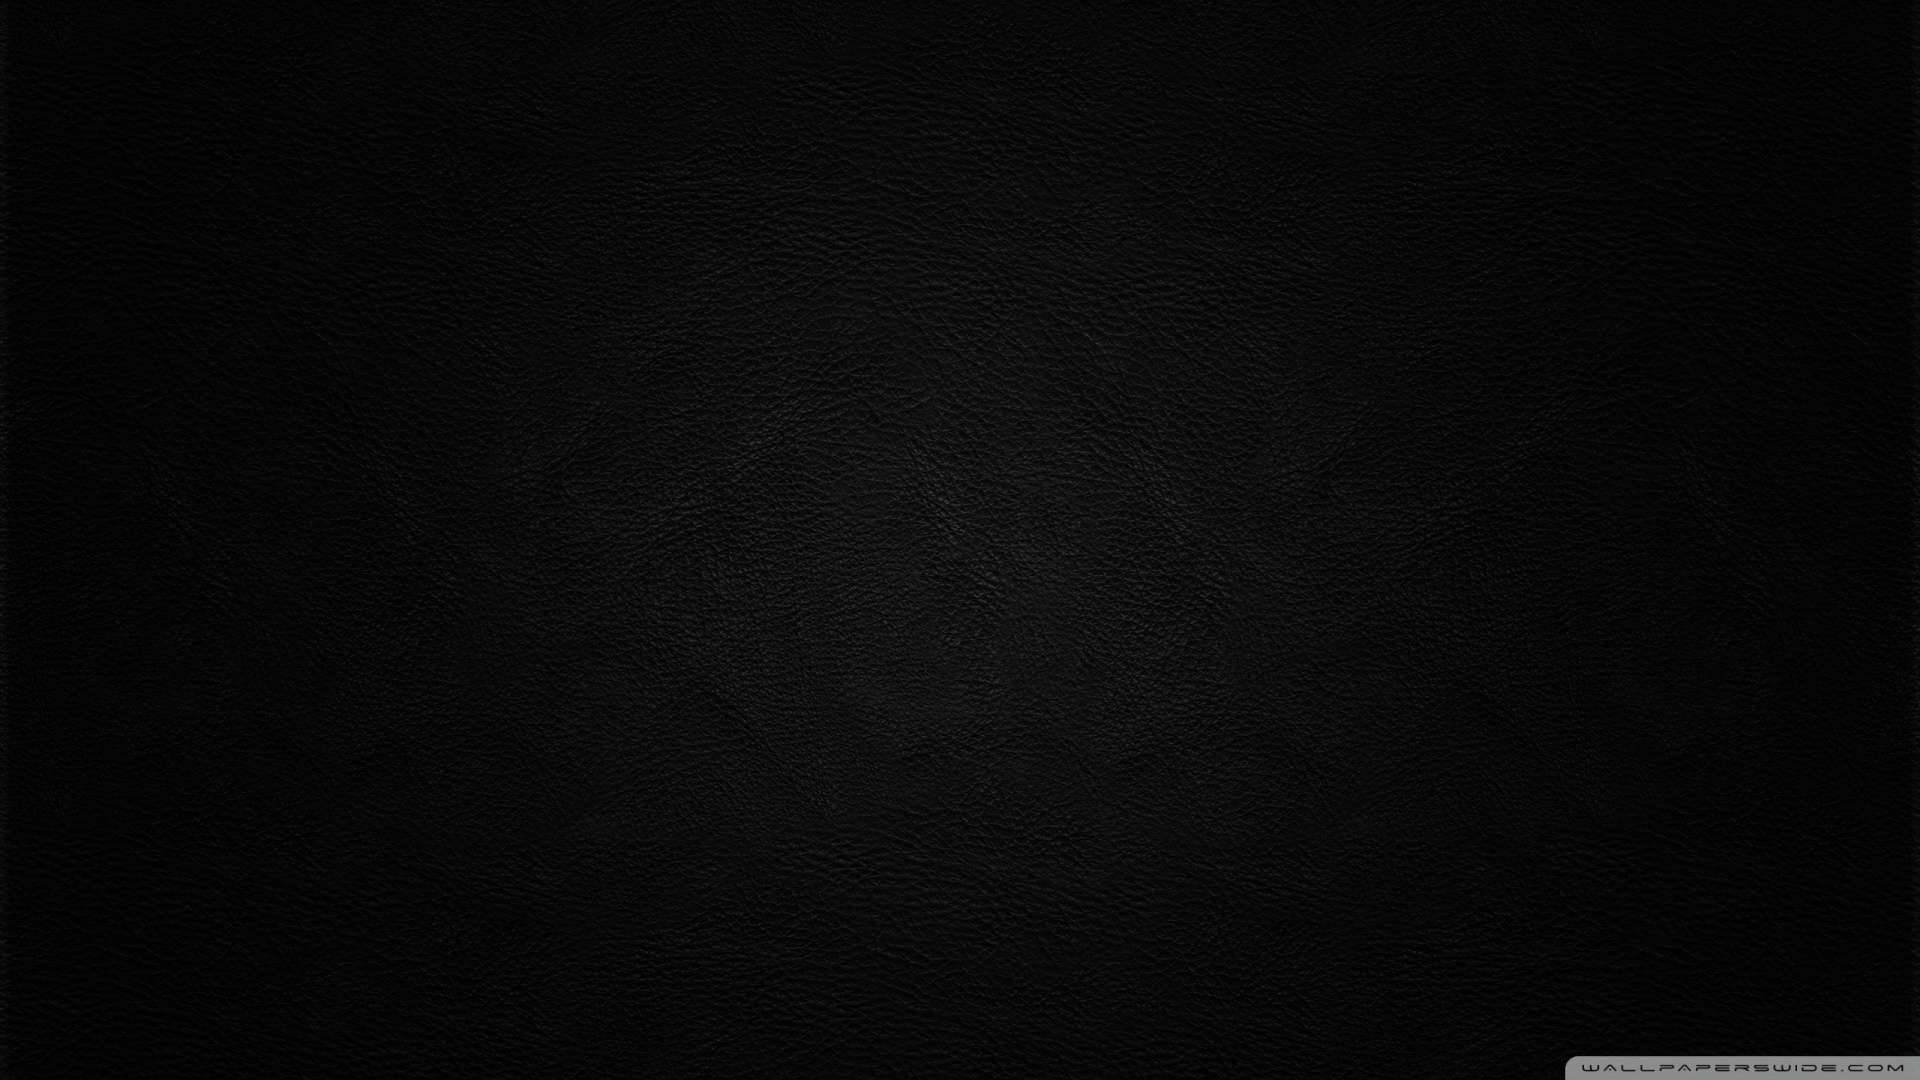 Sleek Pitch Black Leather Material Wallpaper